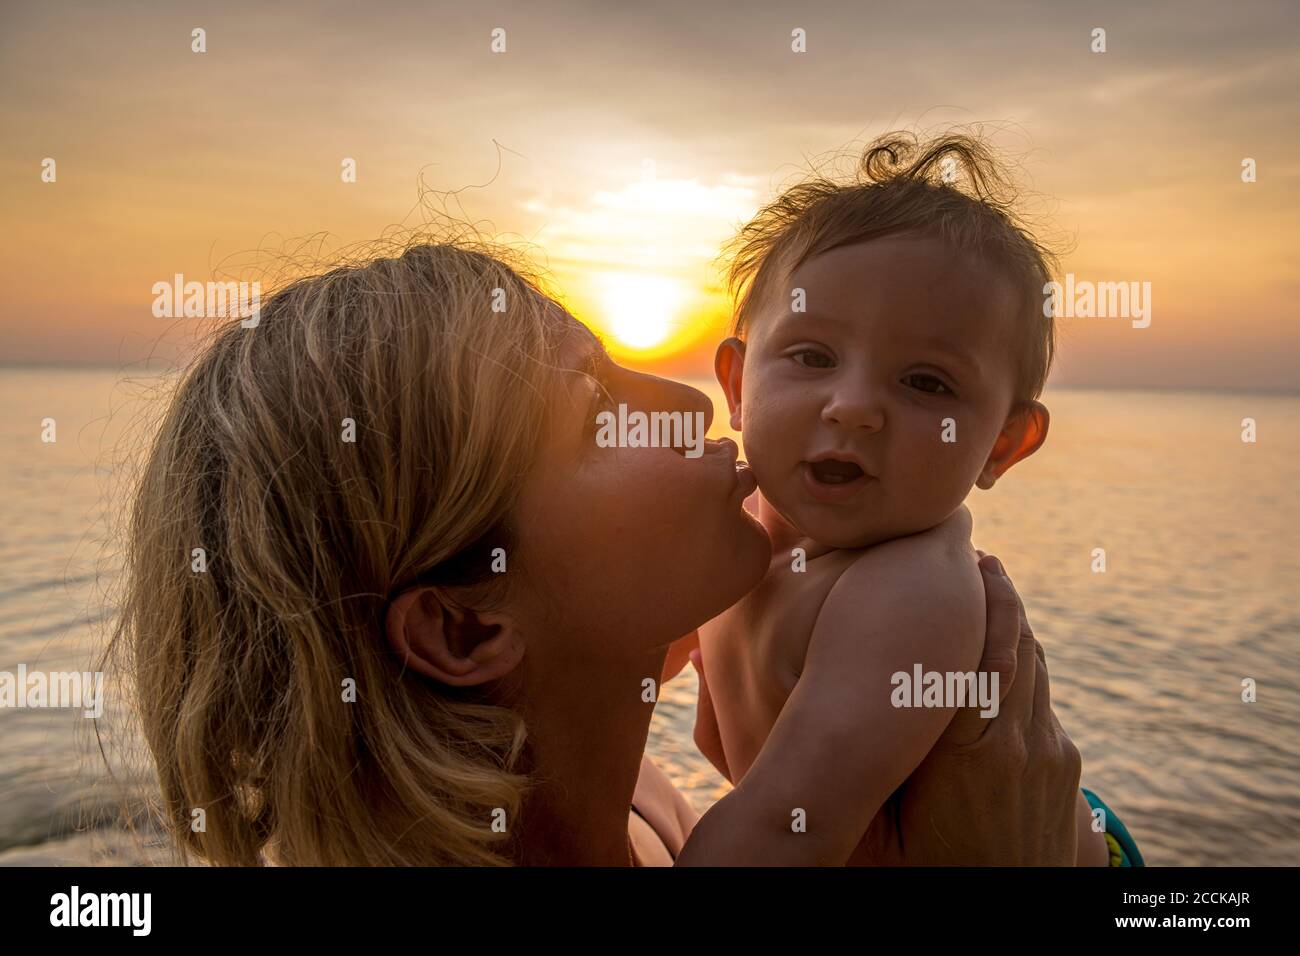 Vietnam, Phu Quoc island, Ong Lang beach, Mother kissing baby in beach at sunset Stock Photo